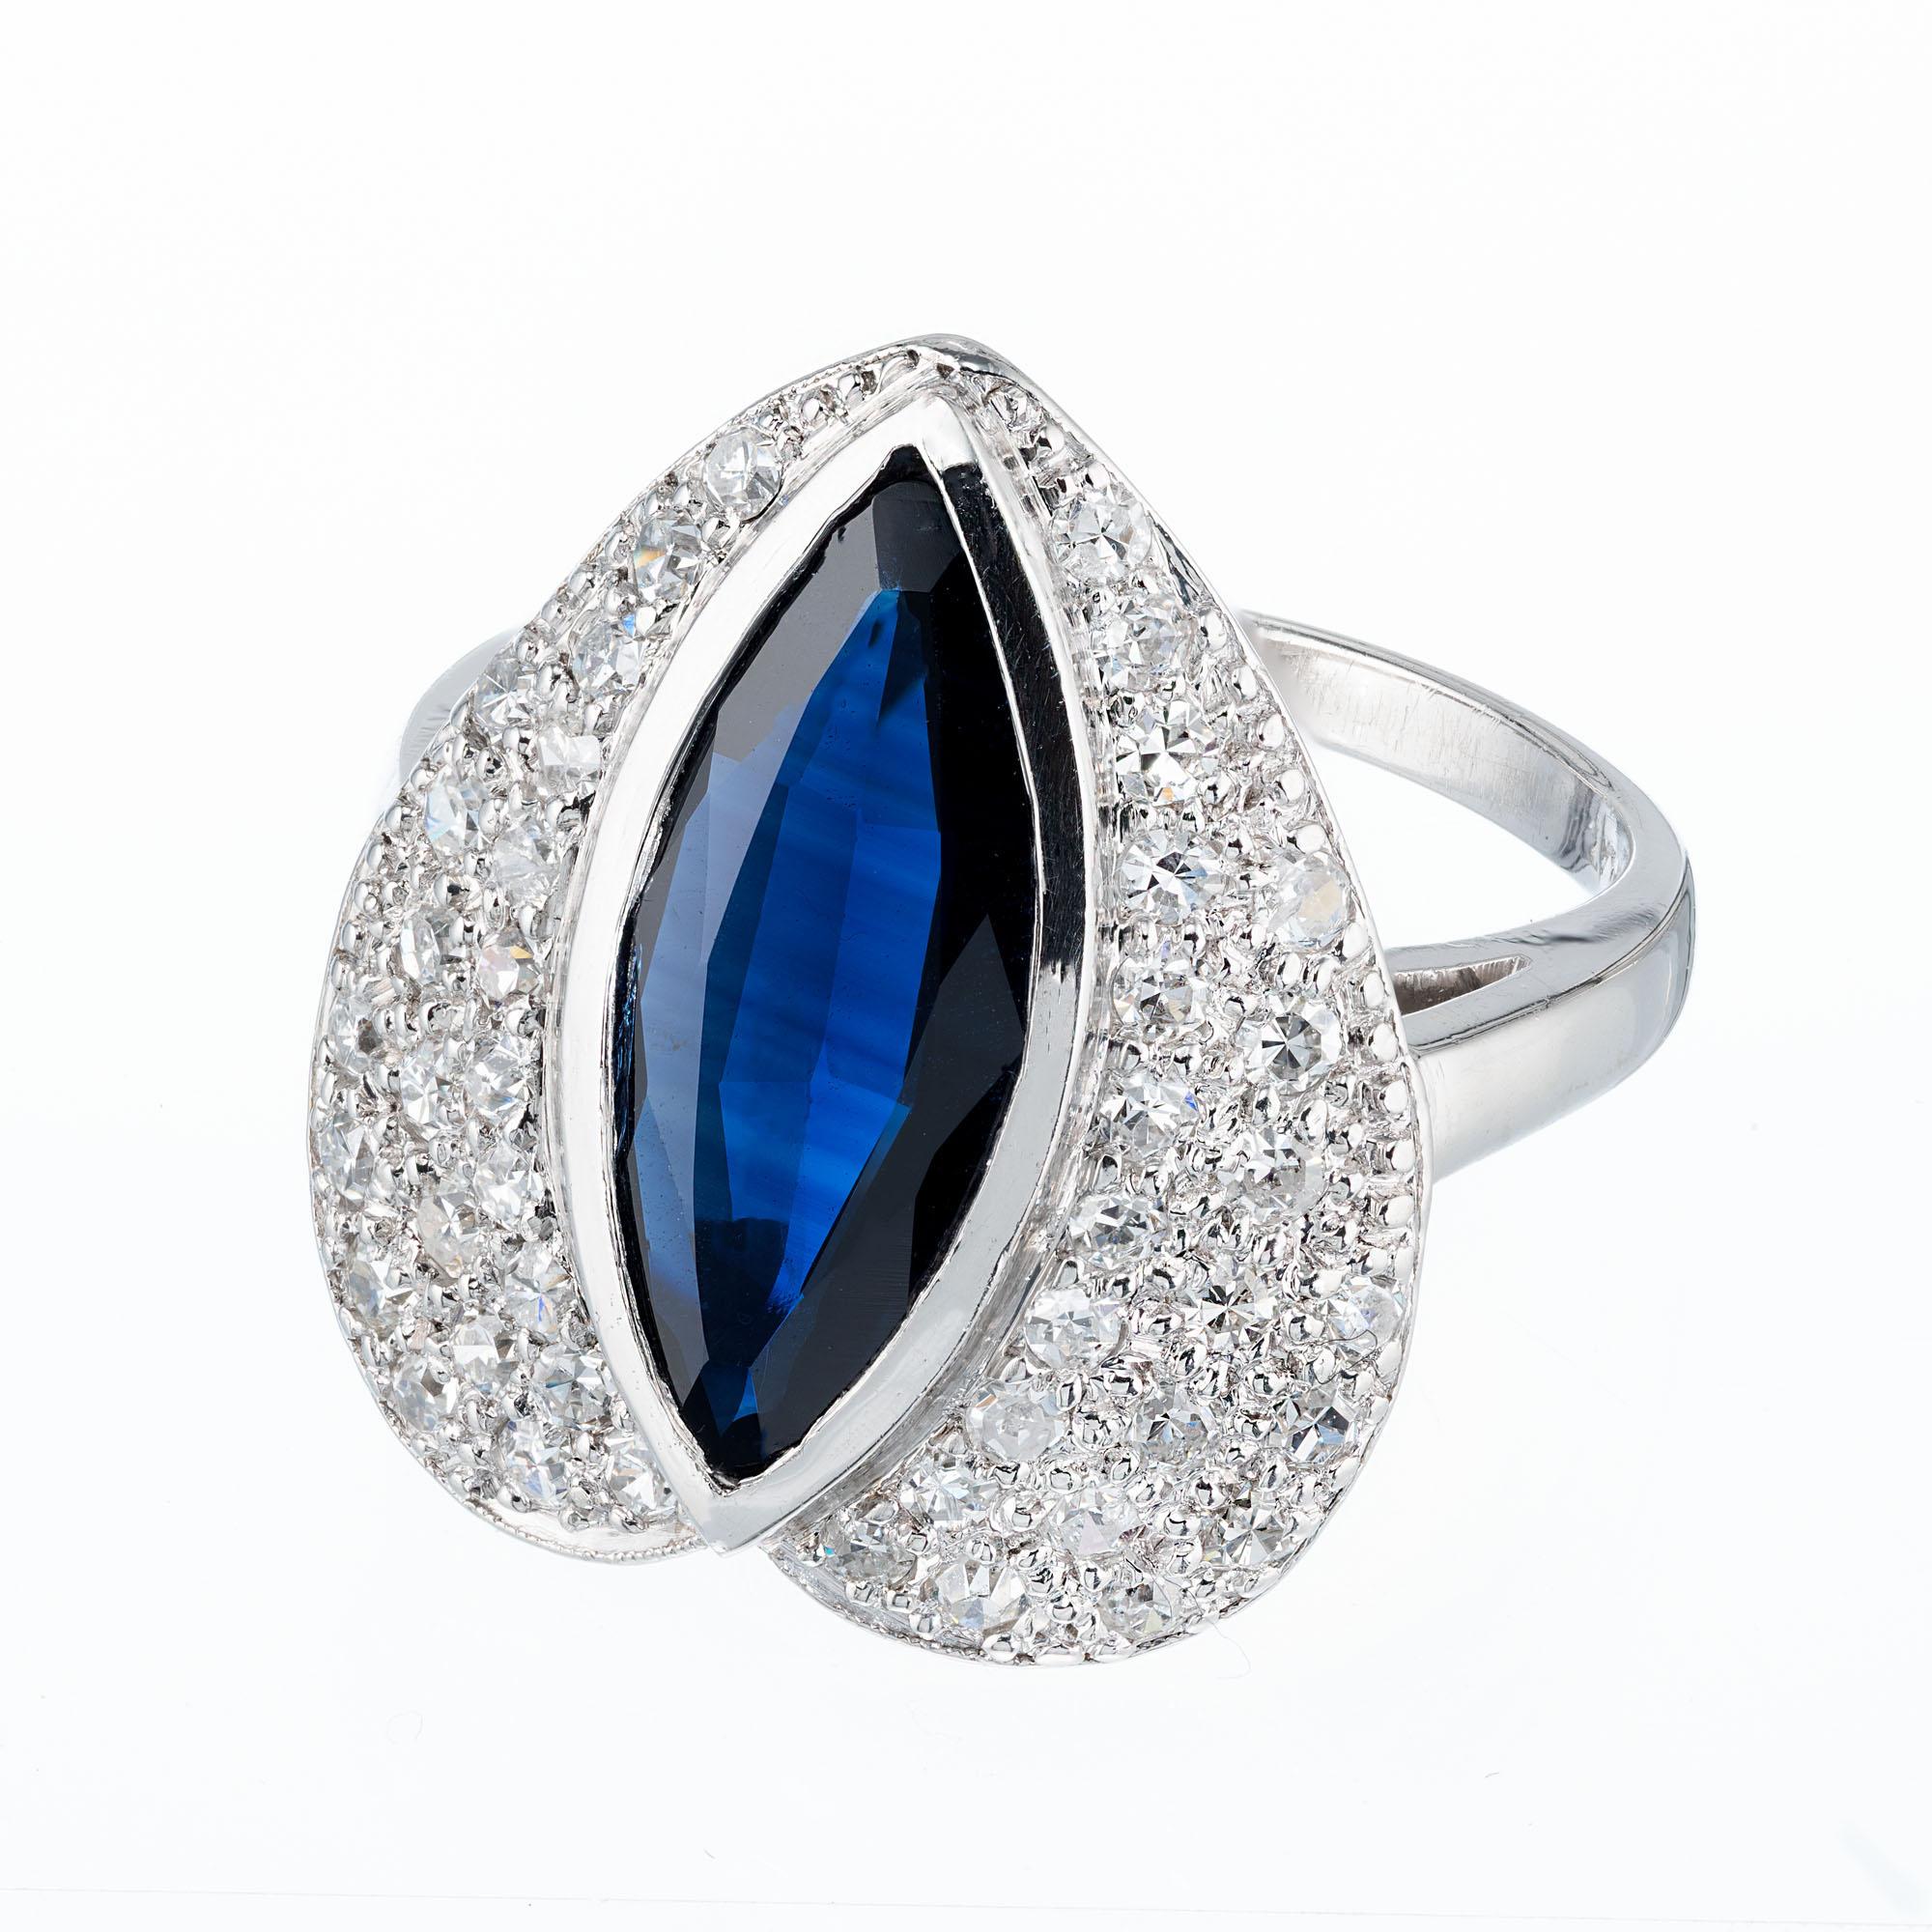 Heart shaped ring set with a royal blue Marquise shaped Sapphire in the heart shaped diamond top. Circa 1960-1970.

1 Royal blue Sapphire 15 x 6mm Marquise, approx. total weight 2.50cts
44 single cut diamonds approx. total weight .65cts, G,